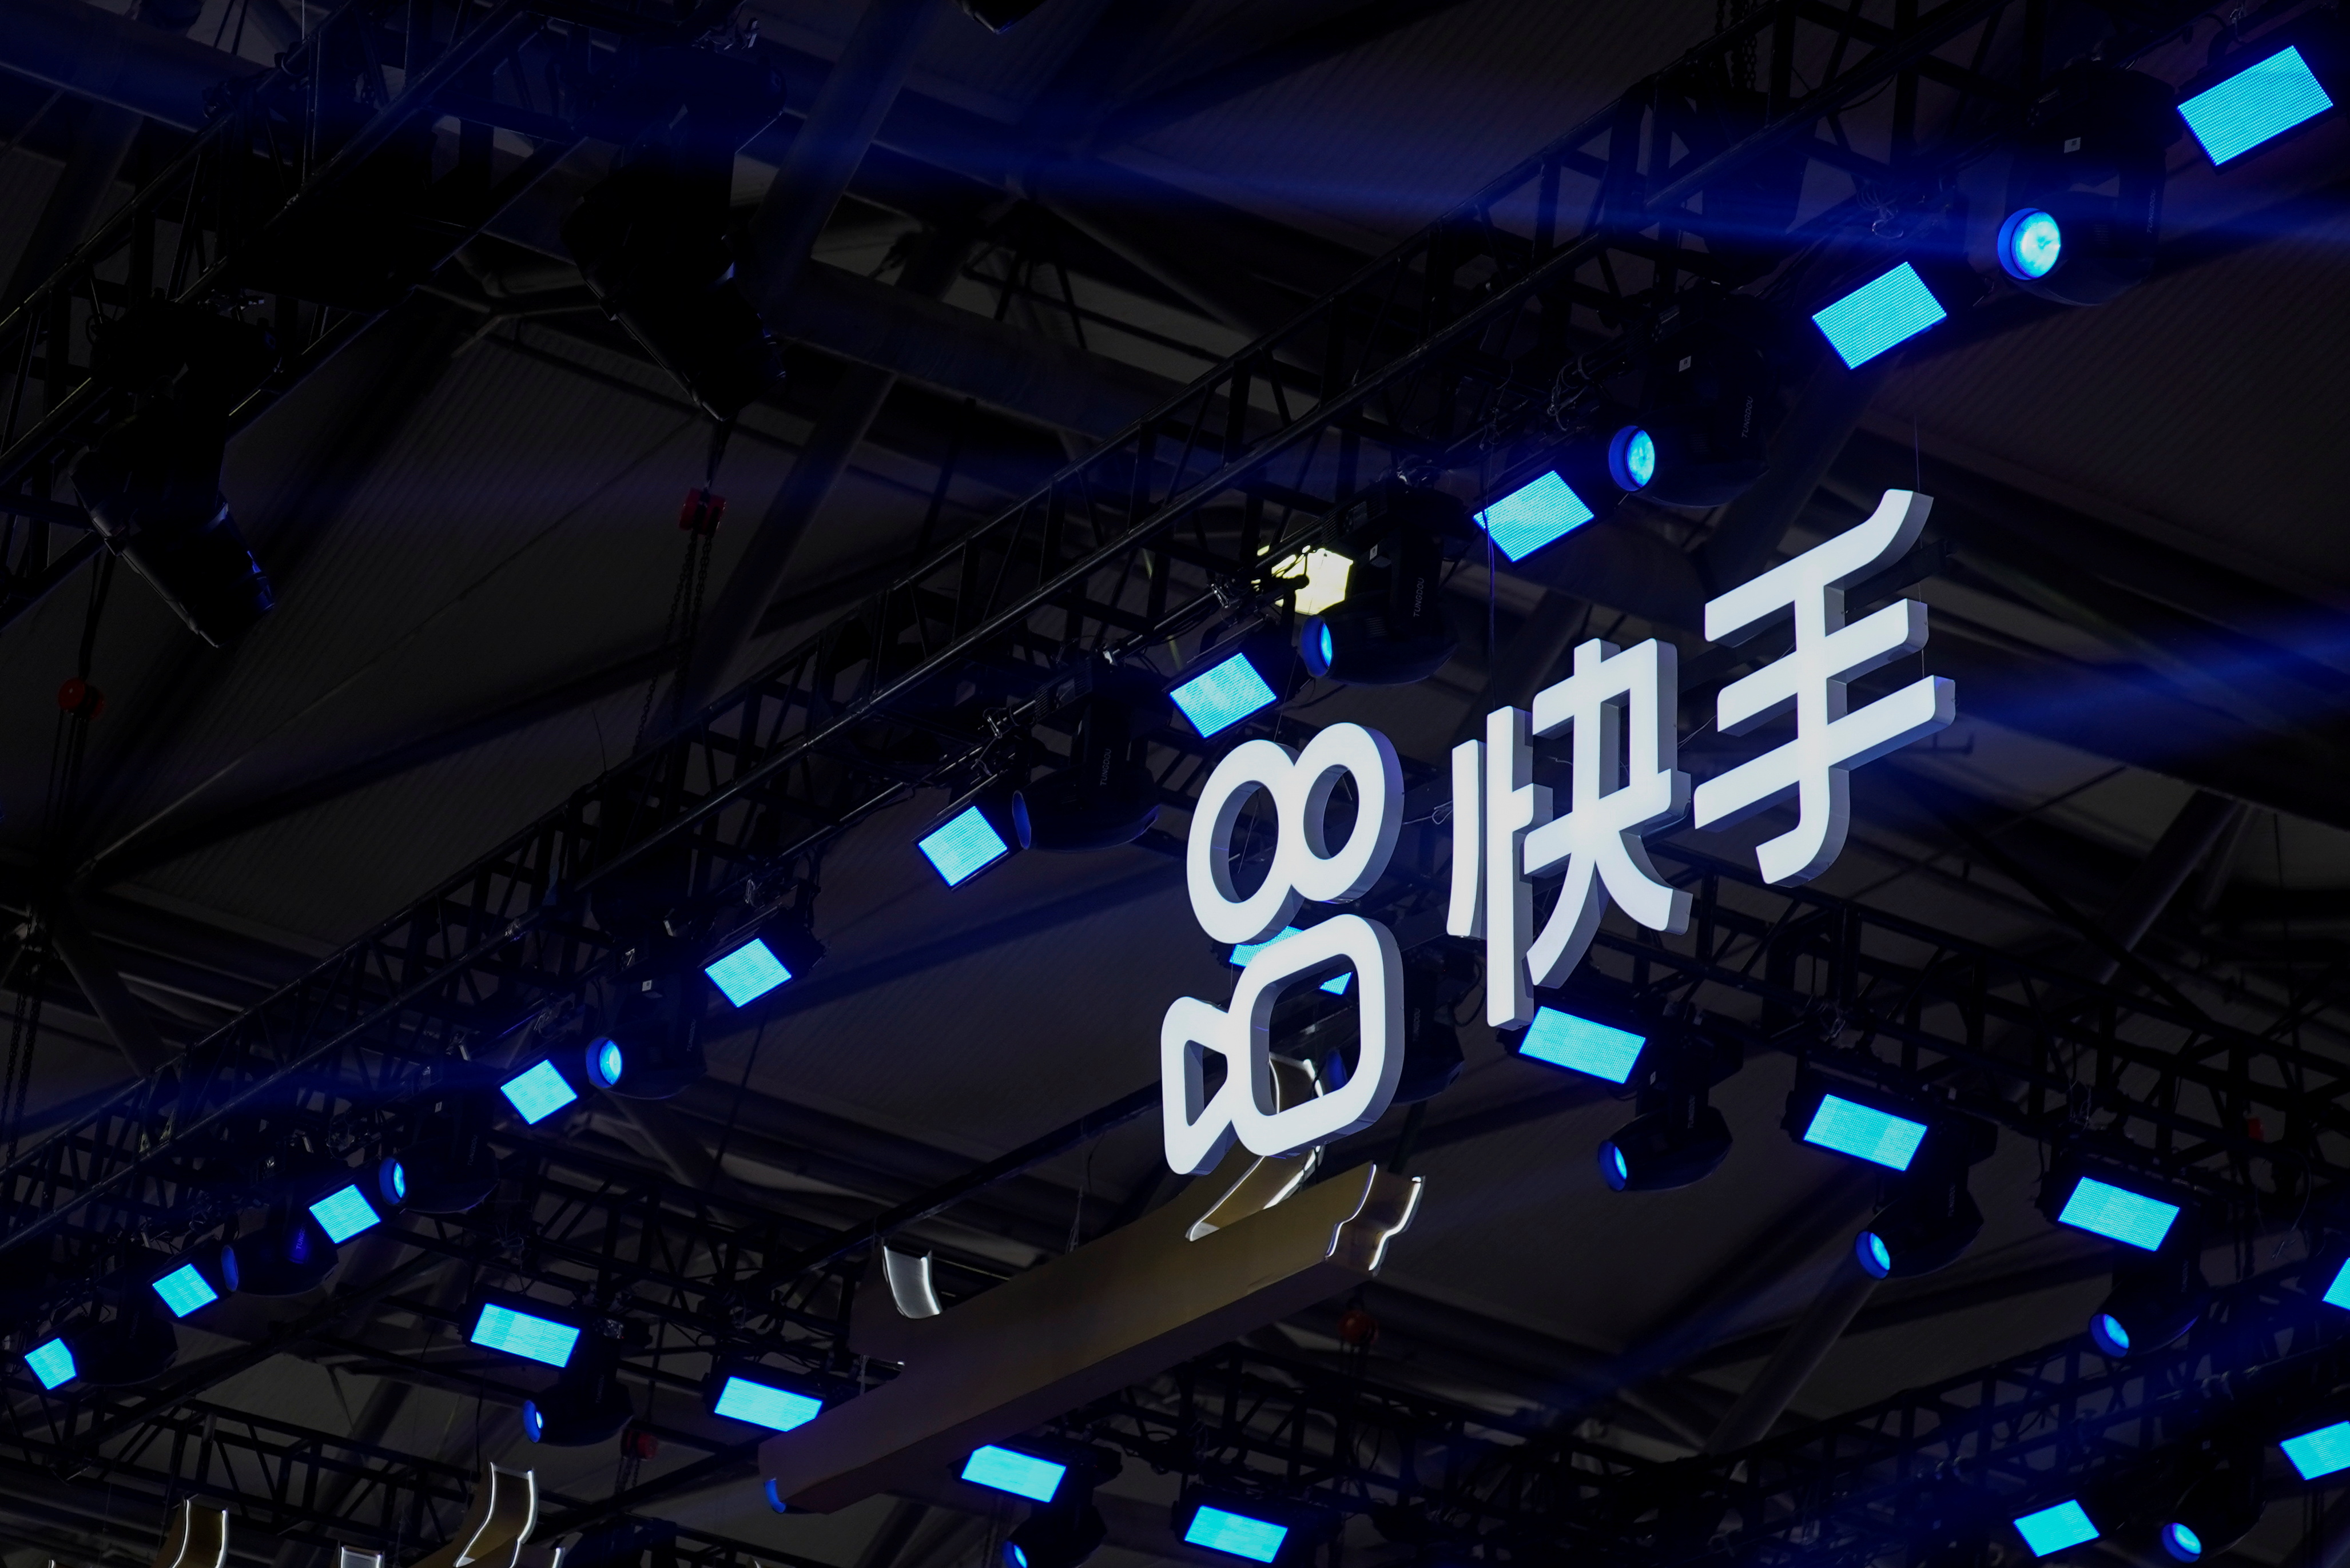 The logo of online video service operator Kuaishou Technology is seen at the China Digital Entertainment Expo and Conference, also known as ChinaJoy, in Shanghai